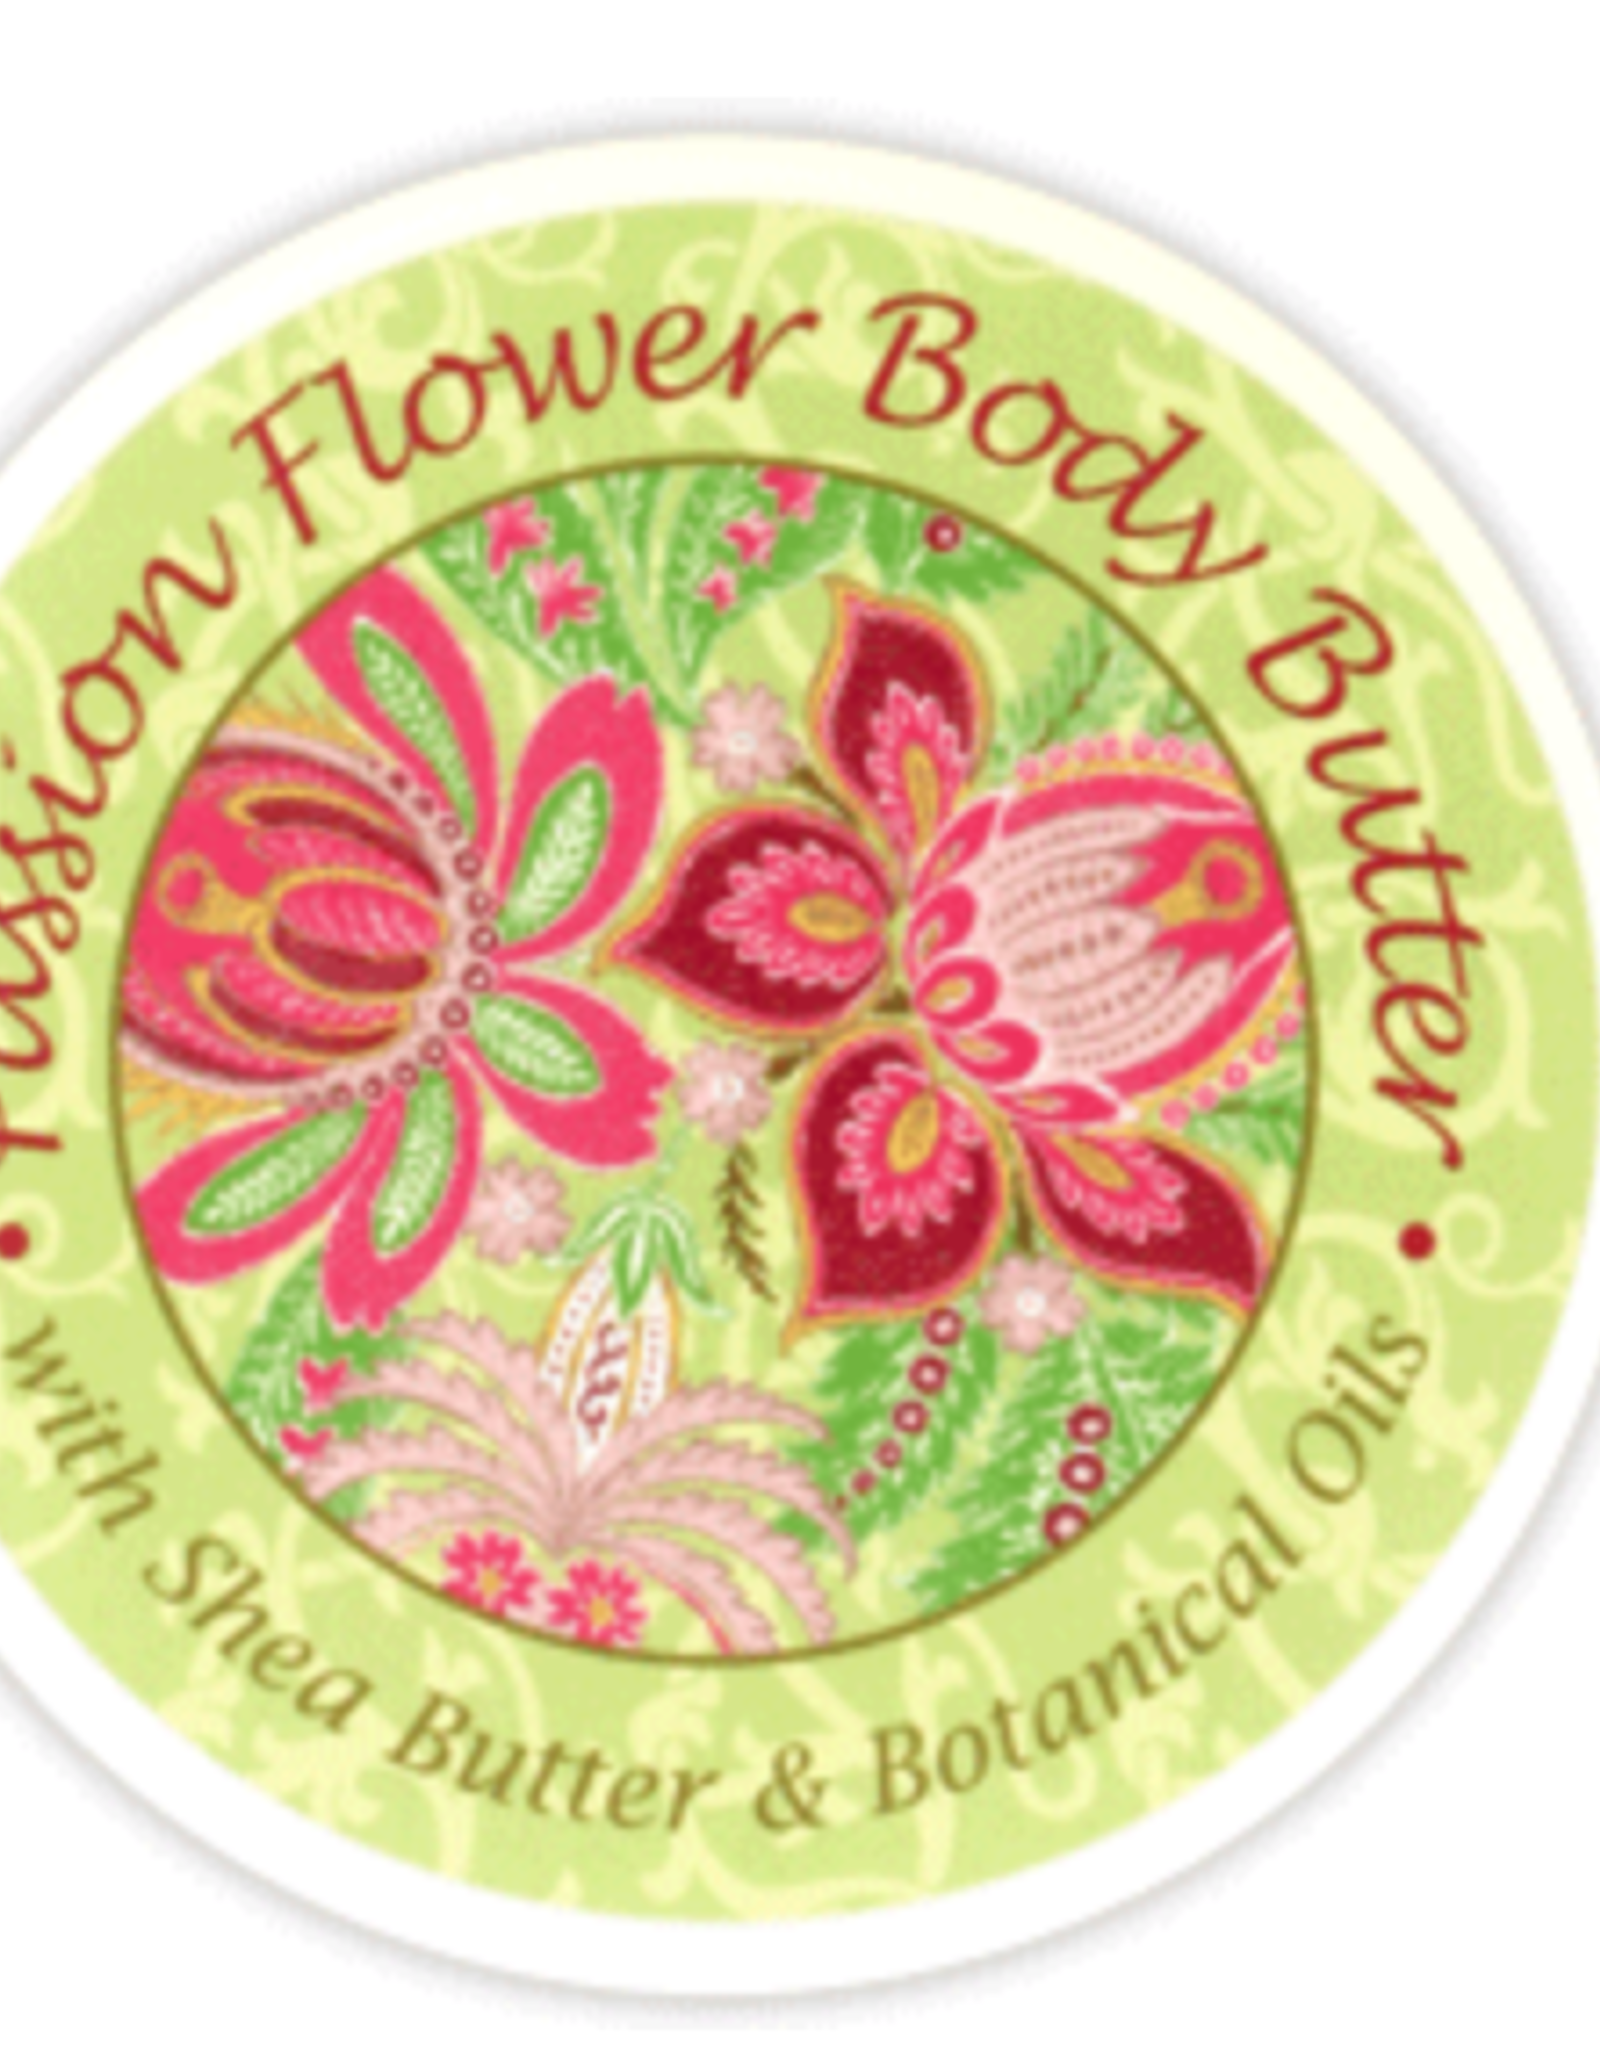 Greenwich Bay Body Butter - Passion Flower & Olive Oil